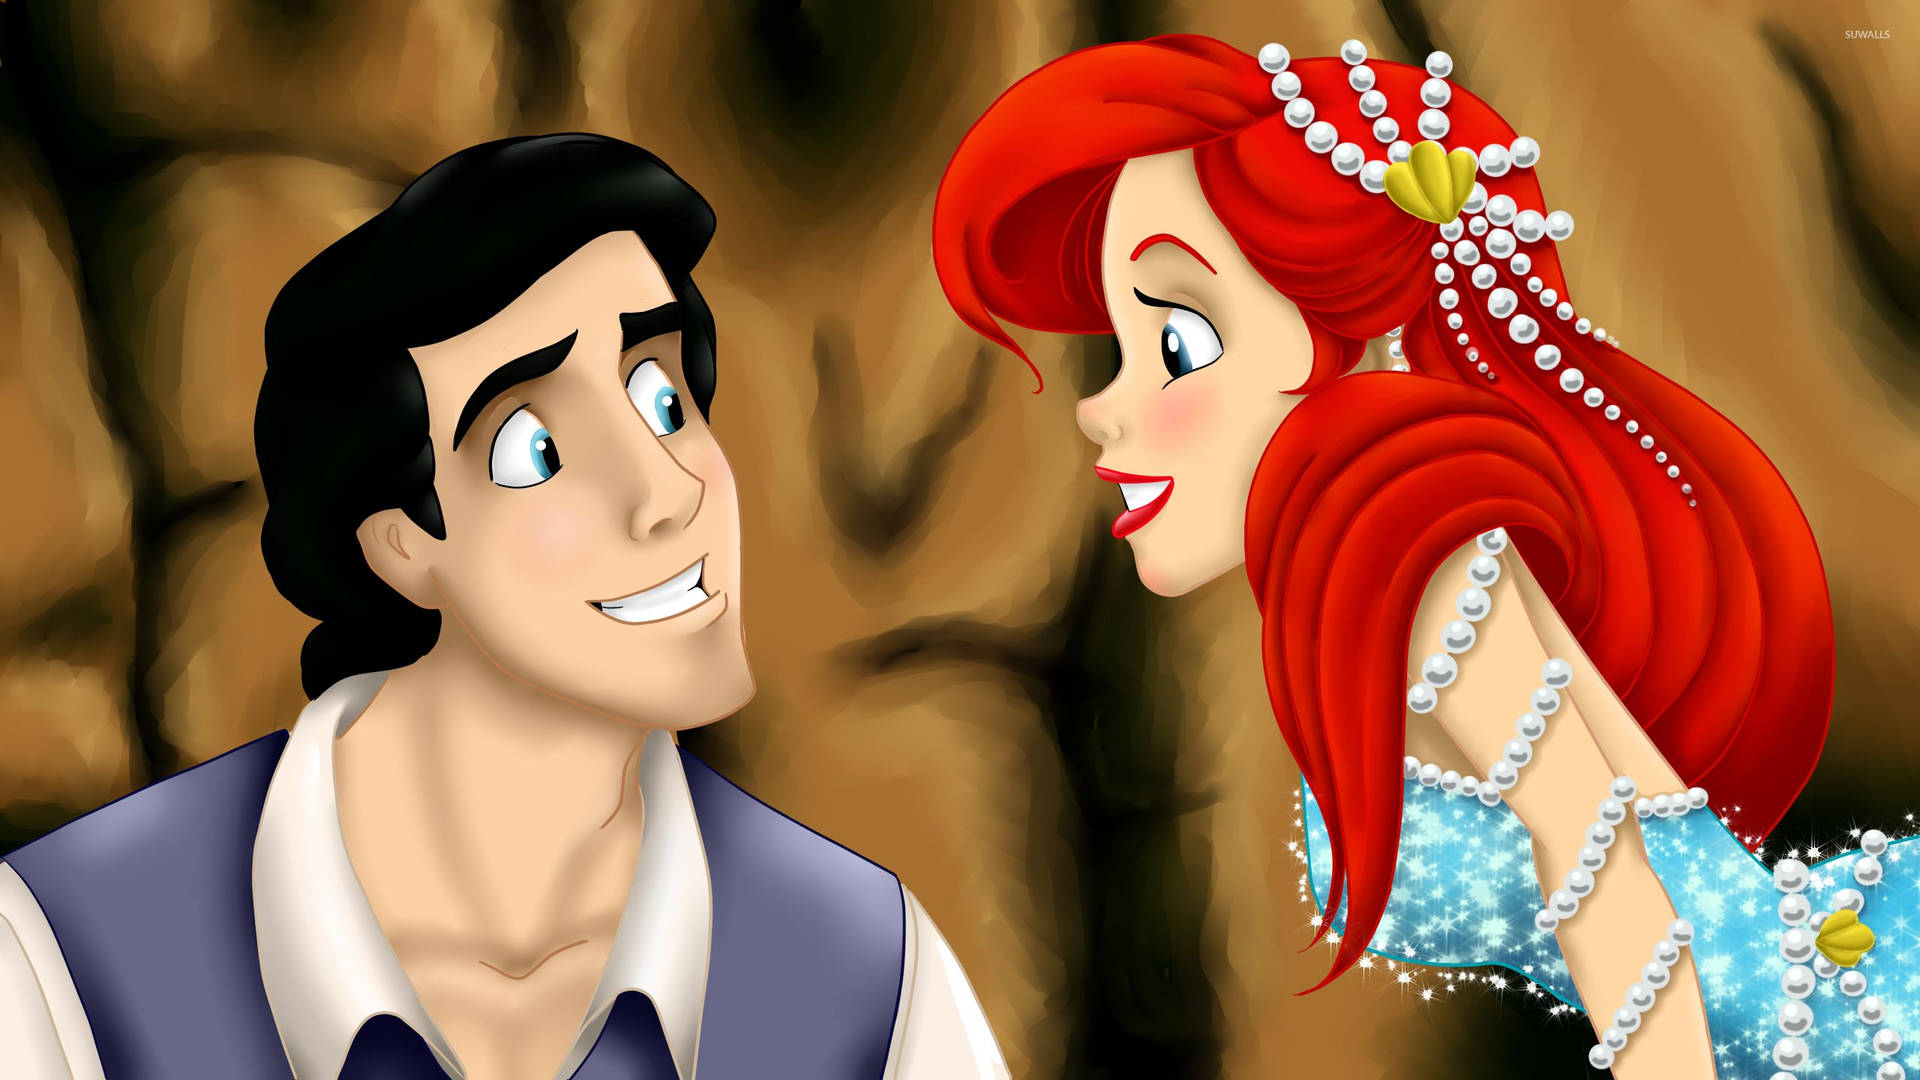 2560X1440 The Little Mermaid Wallpaper and Background